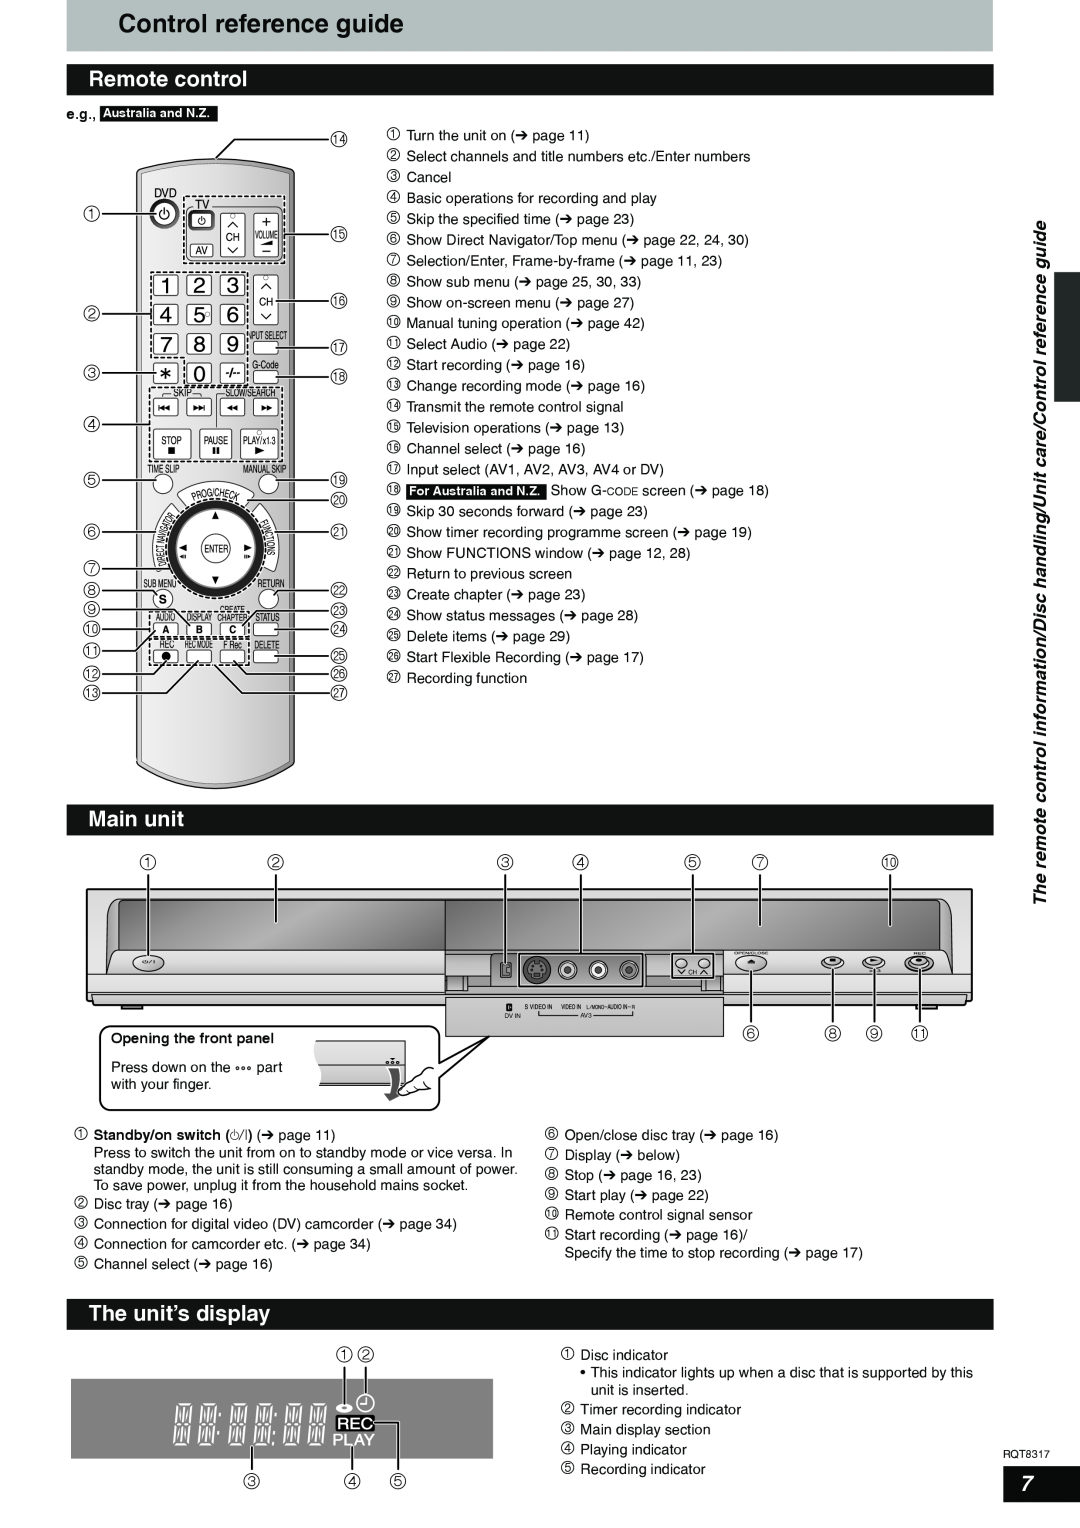 Panasonic DMR-ES15 manual Control reference guide, Remote control, Main unit, 6 8 9 bl, The unit’s display, The remote 